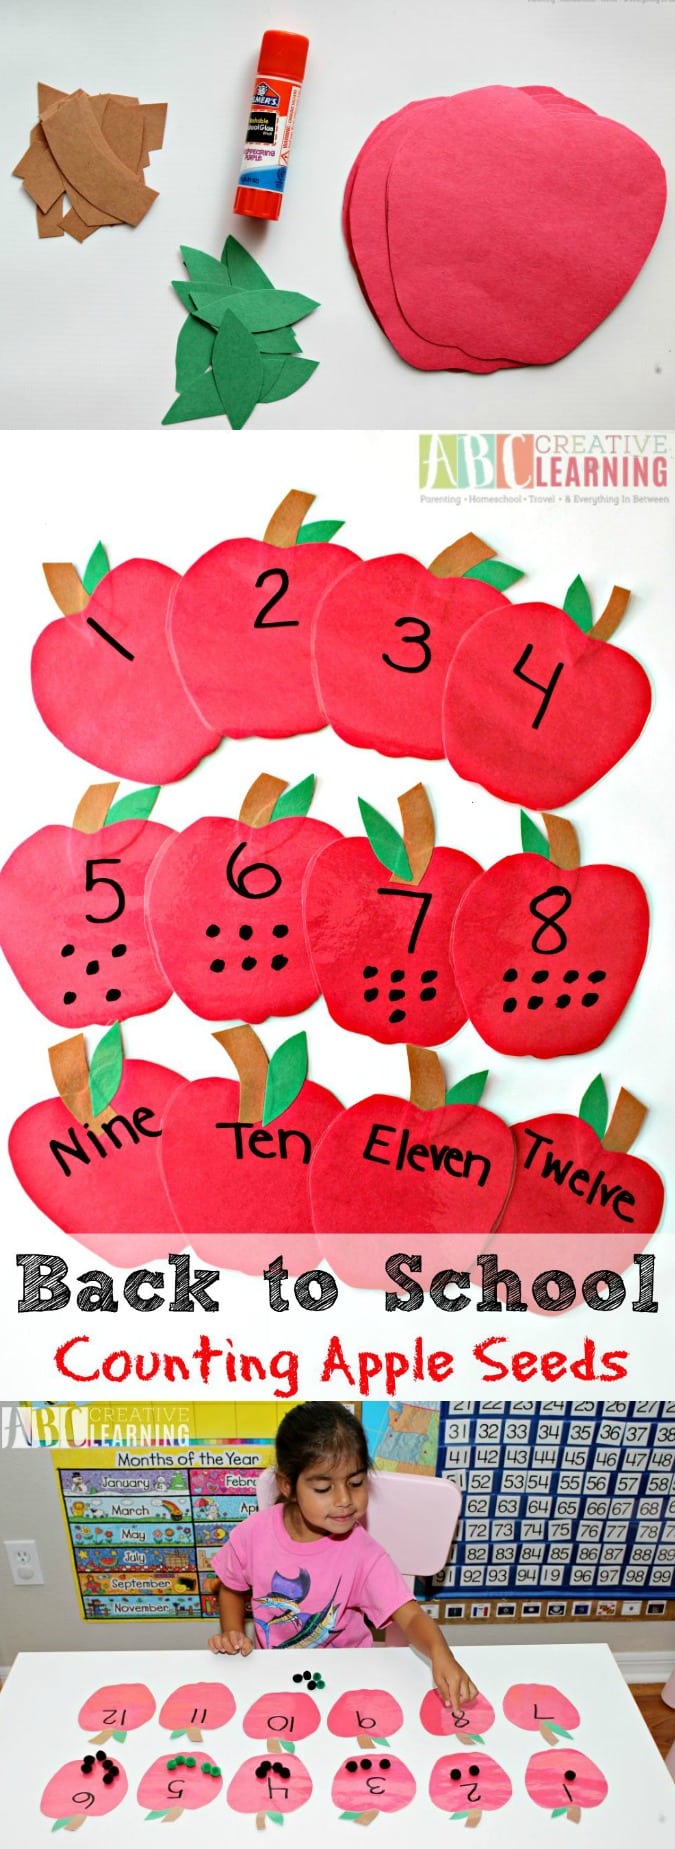 Back To School Counting Apple Seeds - simplytodaylife.com